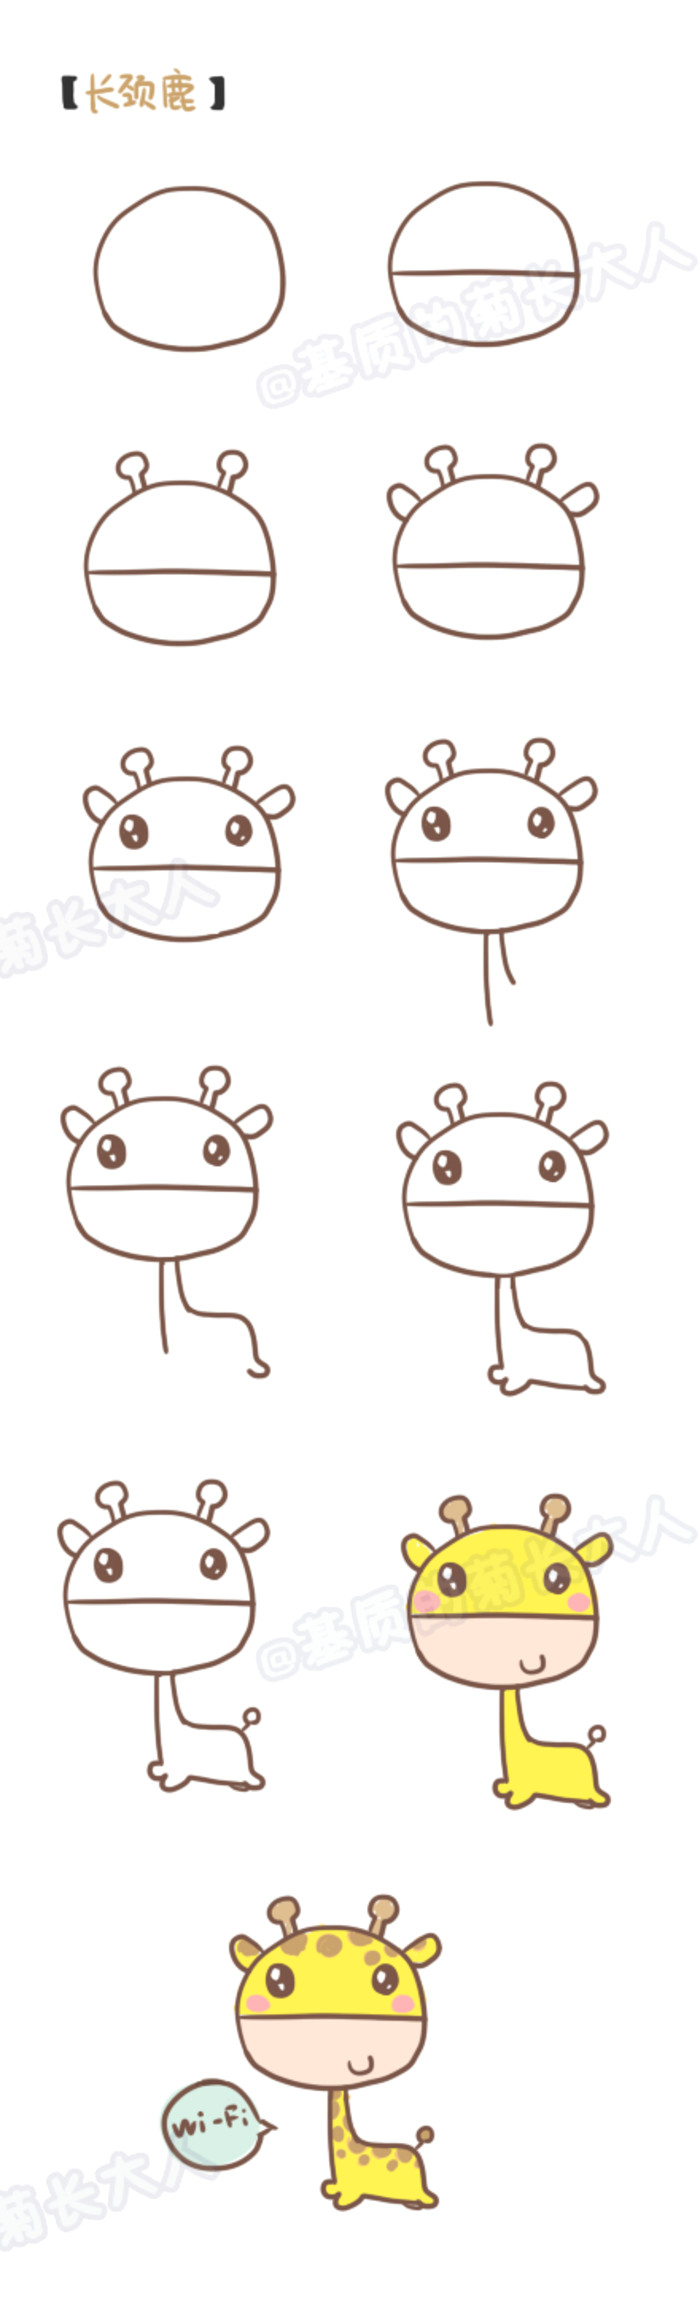 Drawing Cute Animals Step by Step How to Draw A Giraffe Daisy Grew Up In Person From the Matrix